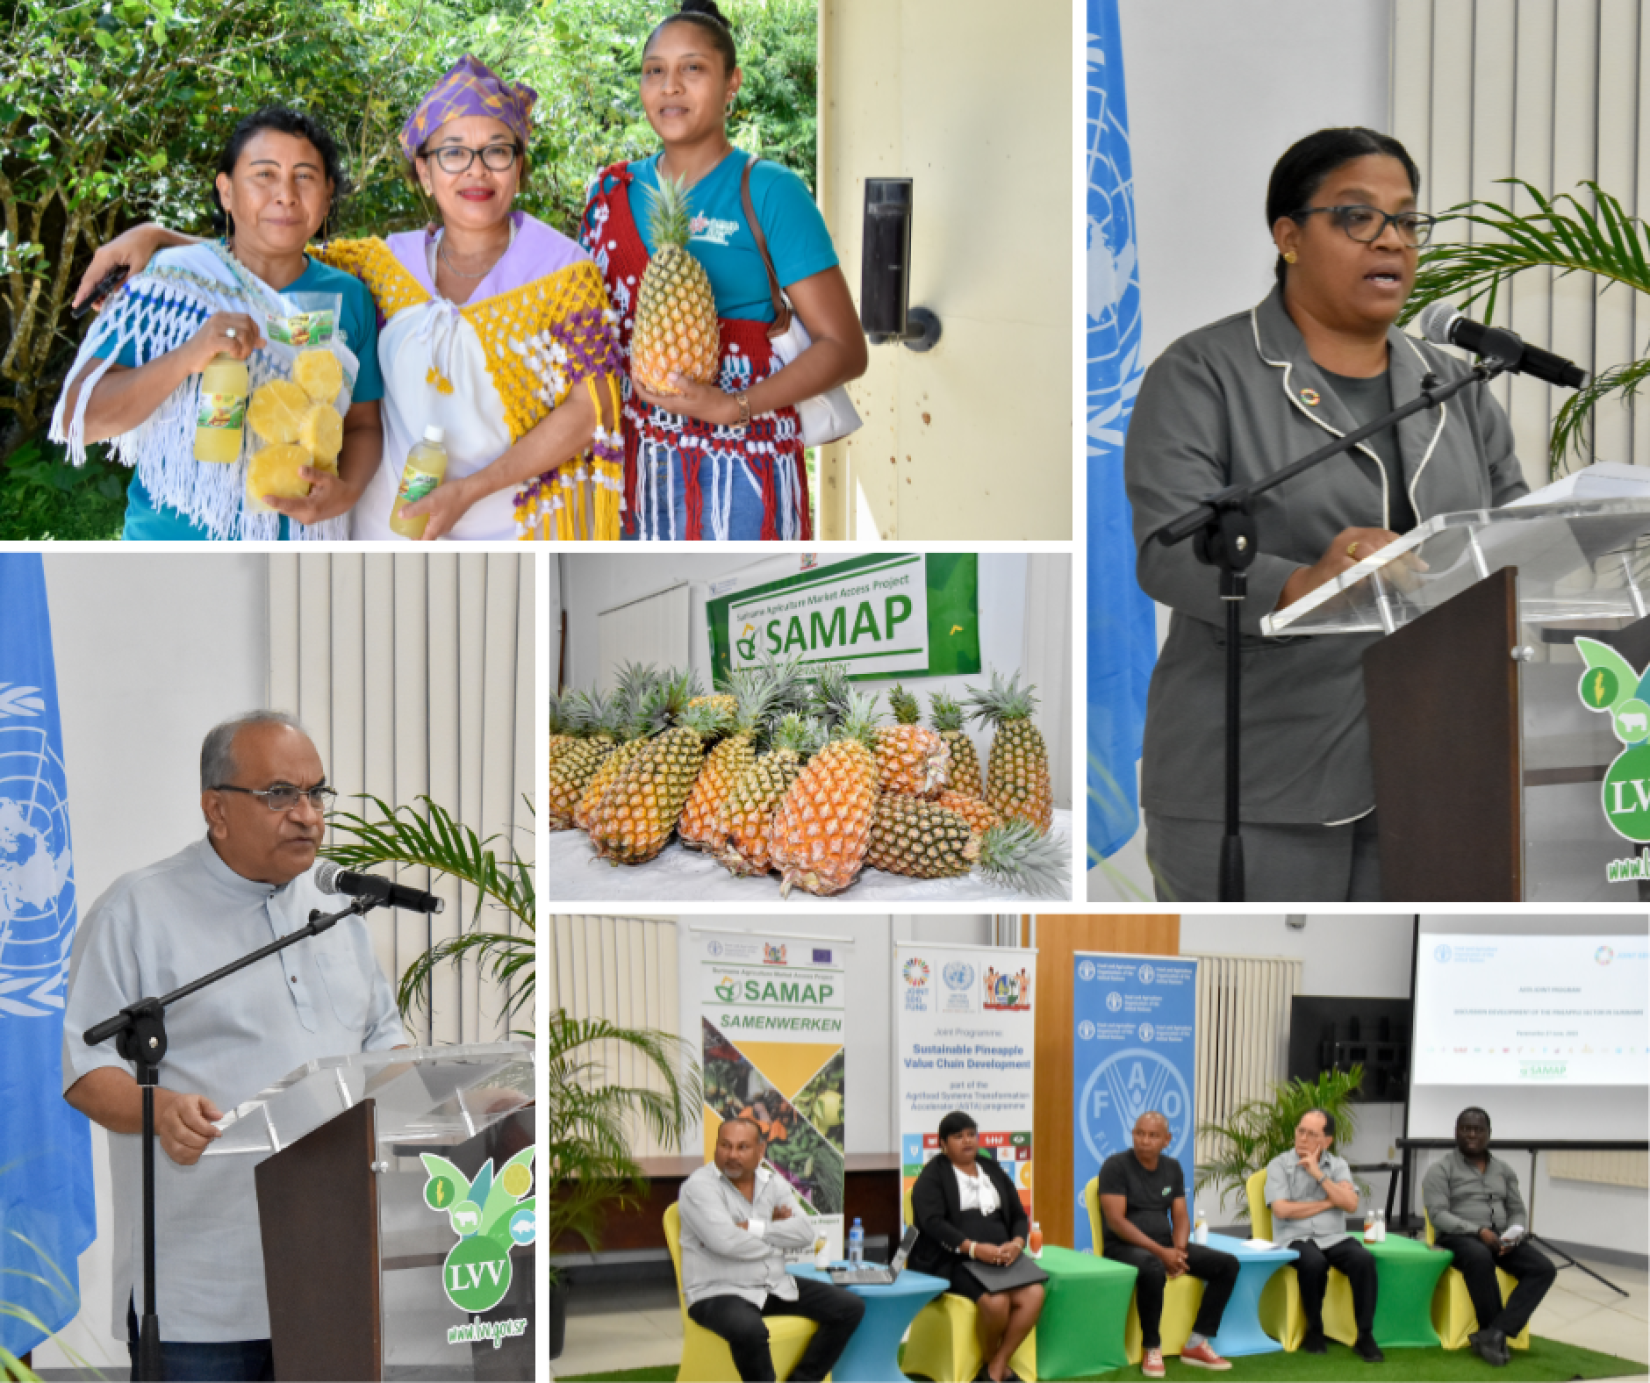 Collage of pictures from the Multi-Stakeholder Initiative to advance Suriname's pineapple sector